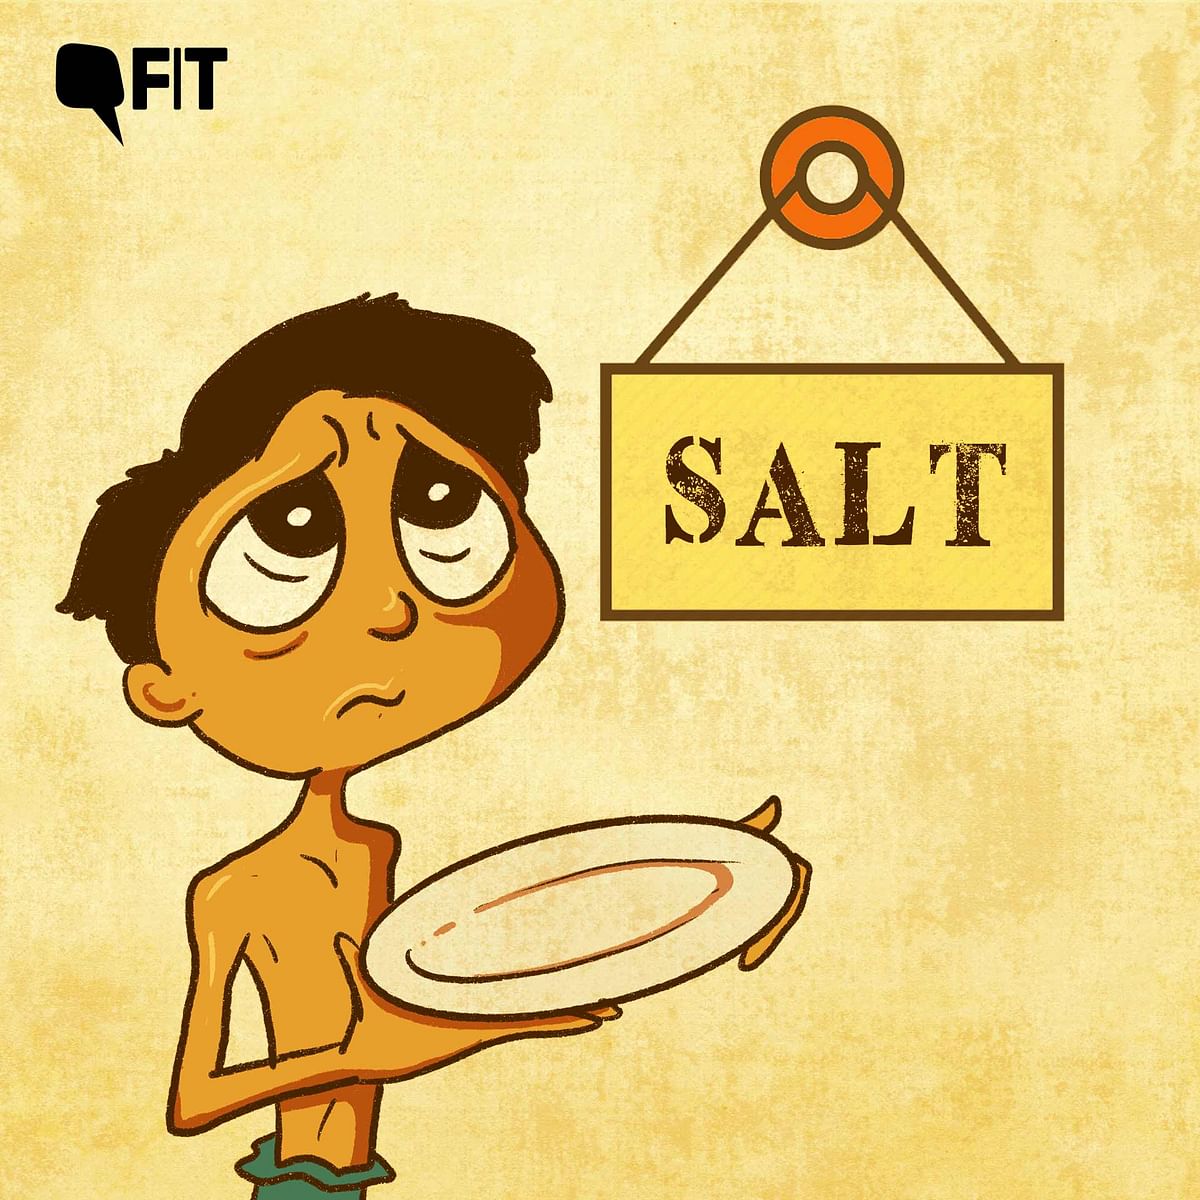 Salt is more than just a condiment. In this story, we explore how it shapes lives in the present day.